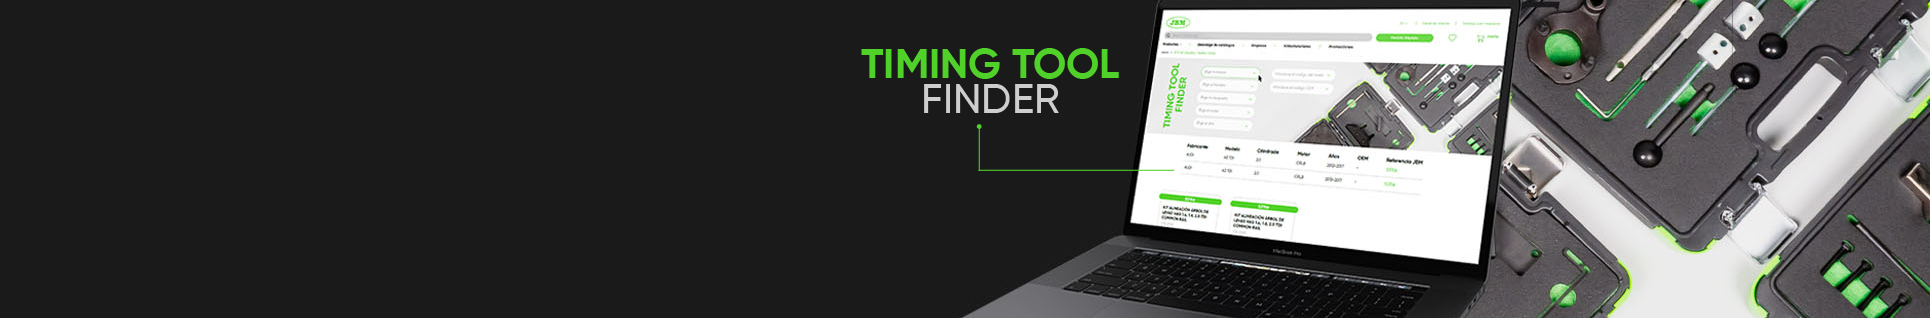 TIMING TOOL FINDER